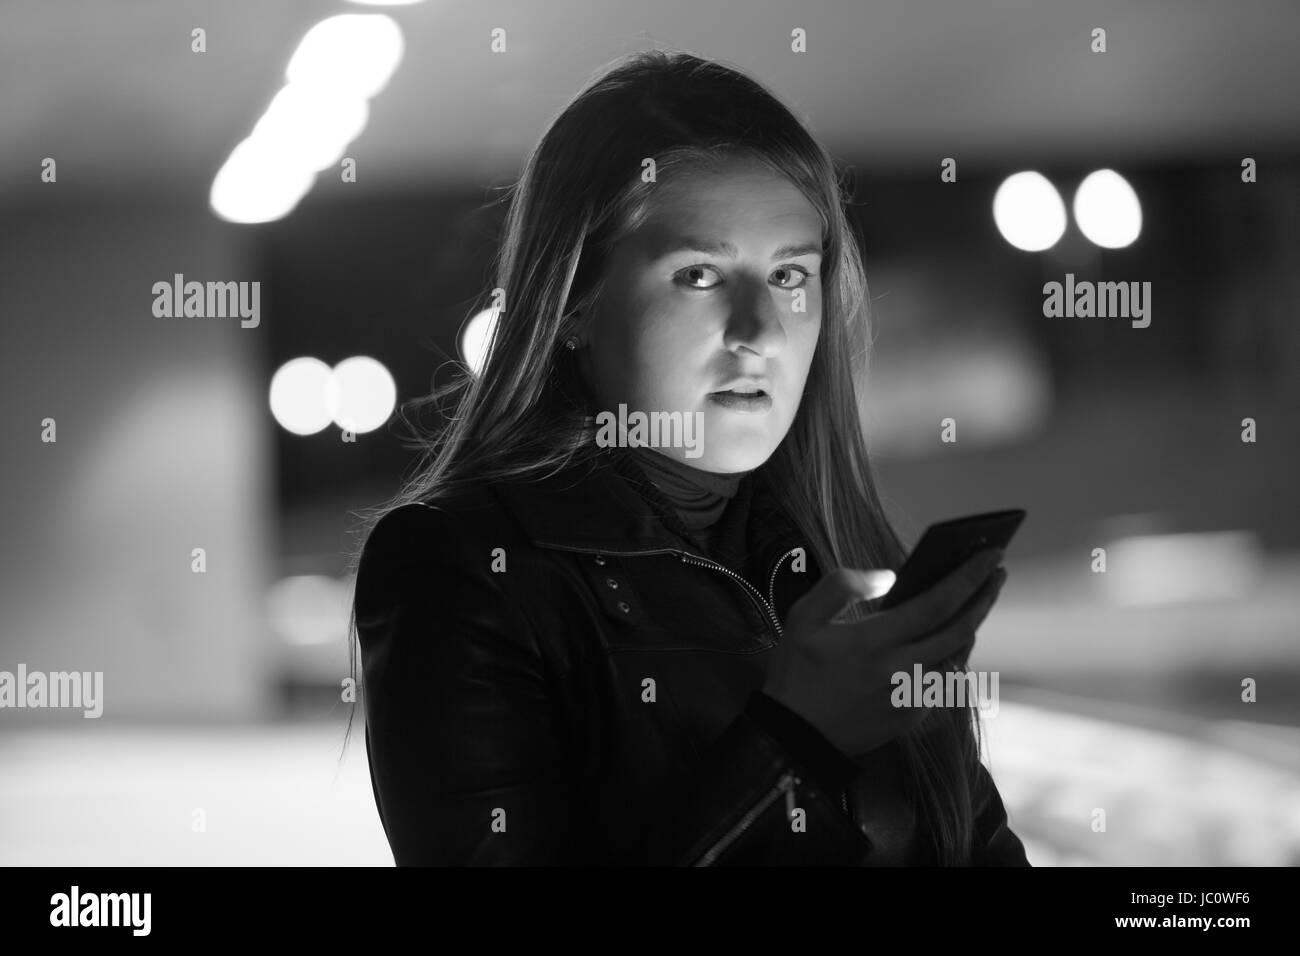 Closeup black and white portrait of lonely woman posing on dark street with telephone Stock Photo